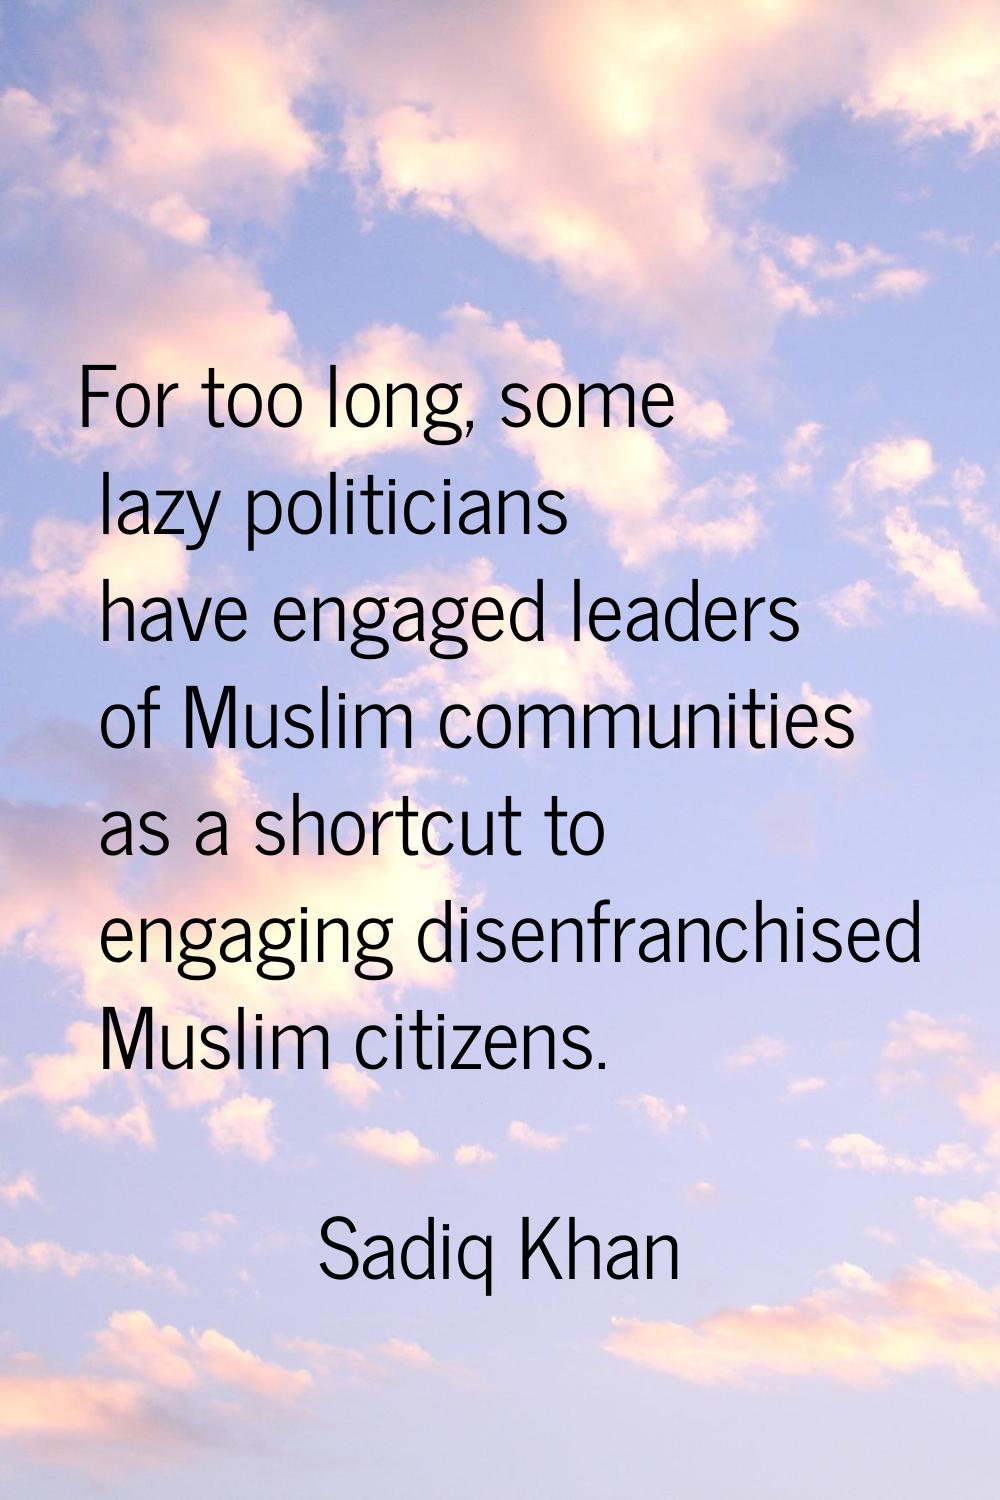 For too long, some lazy politicians have engaged leaders of Muslim communities as a shortcut to eng